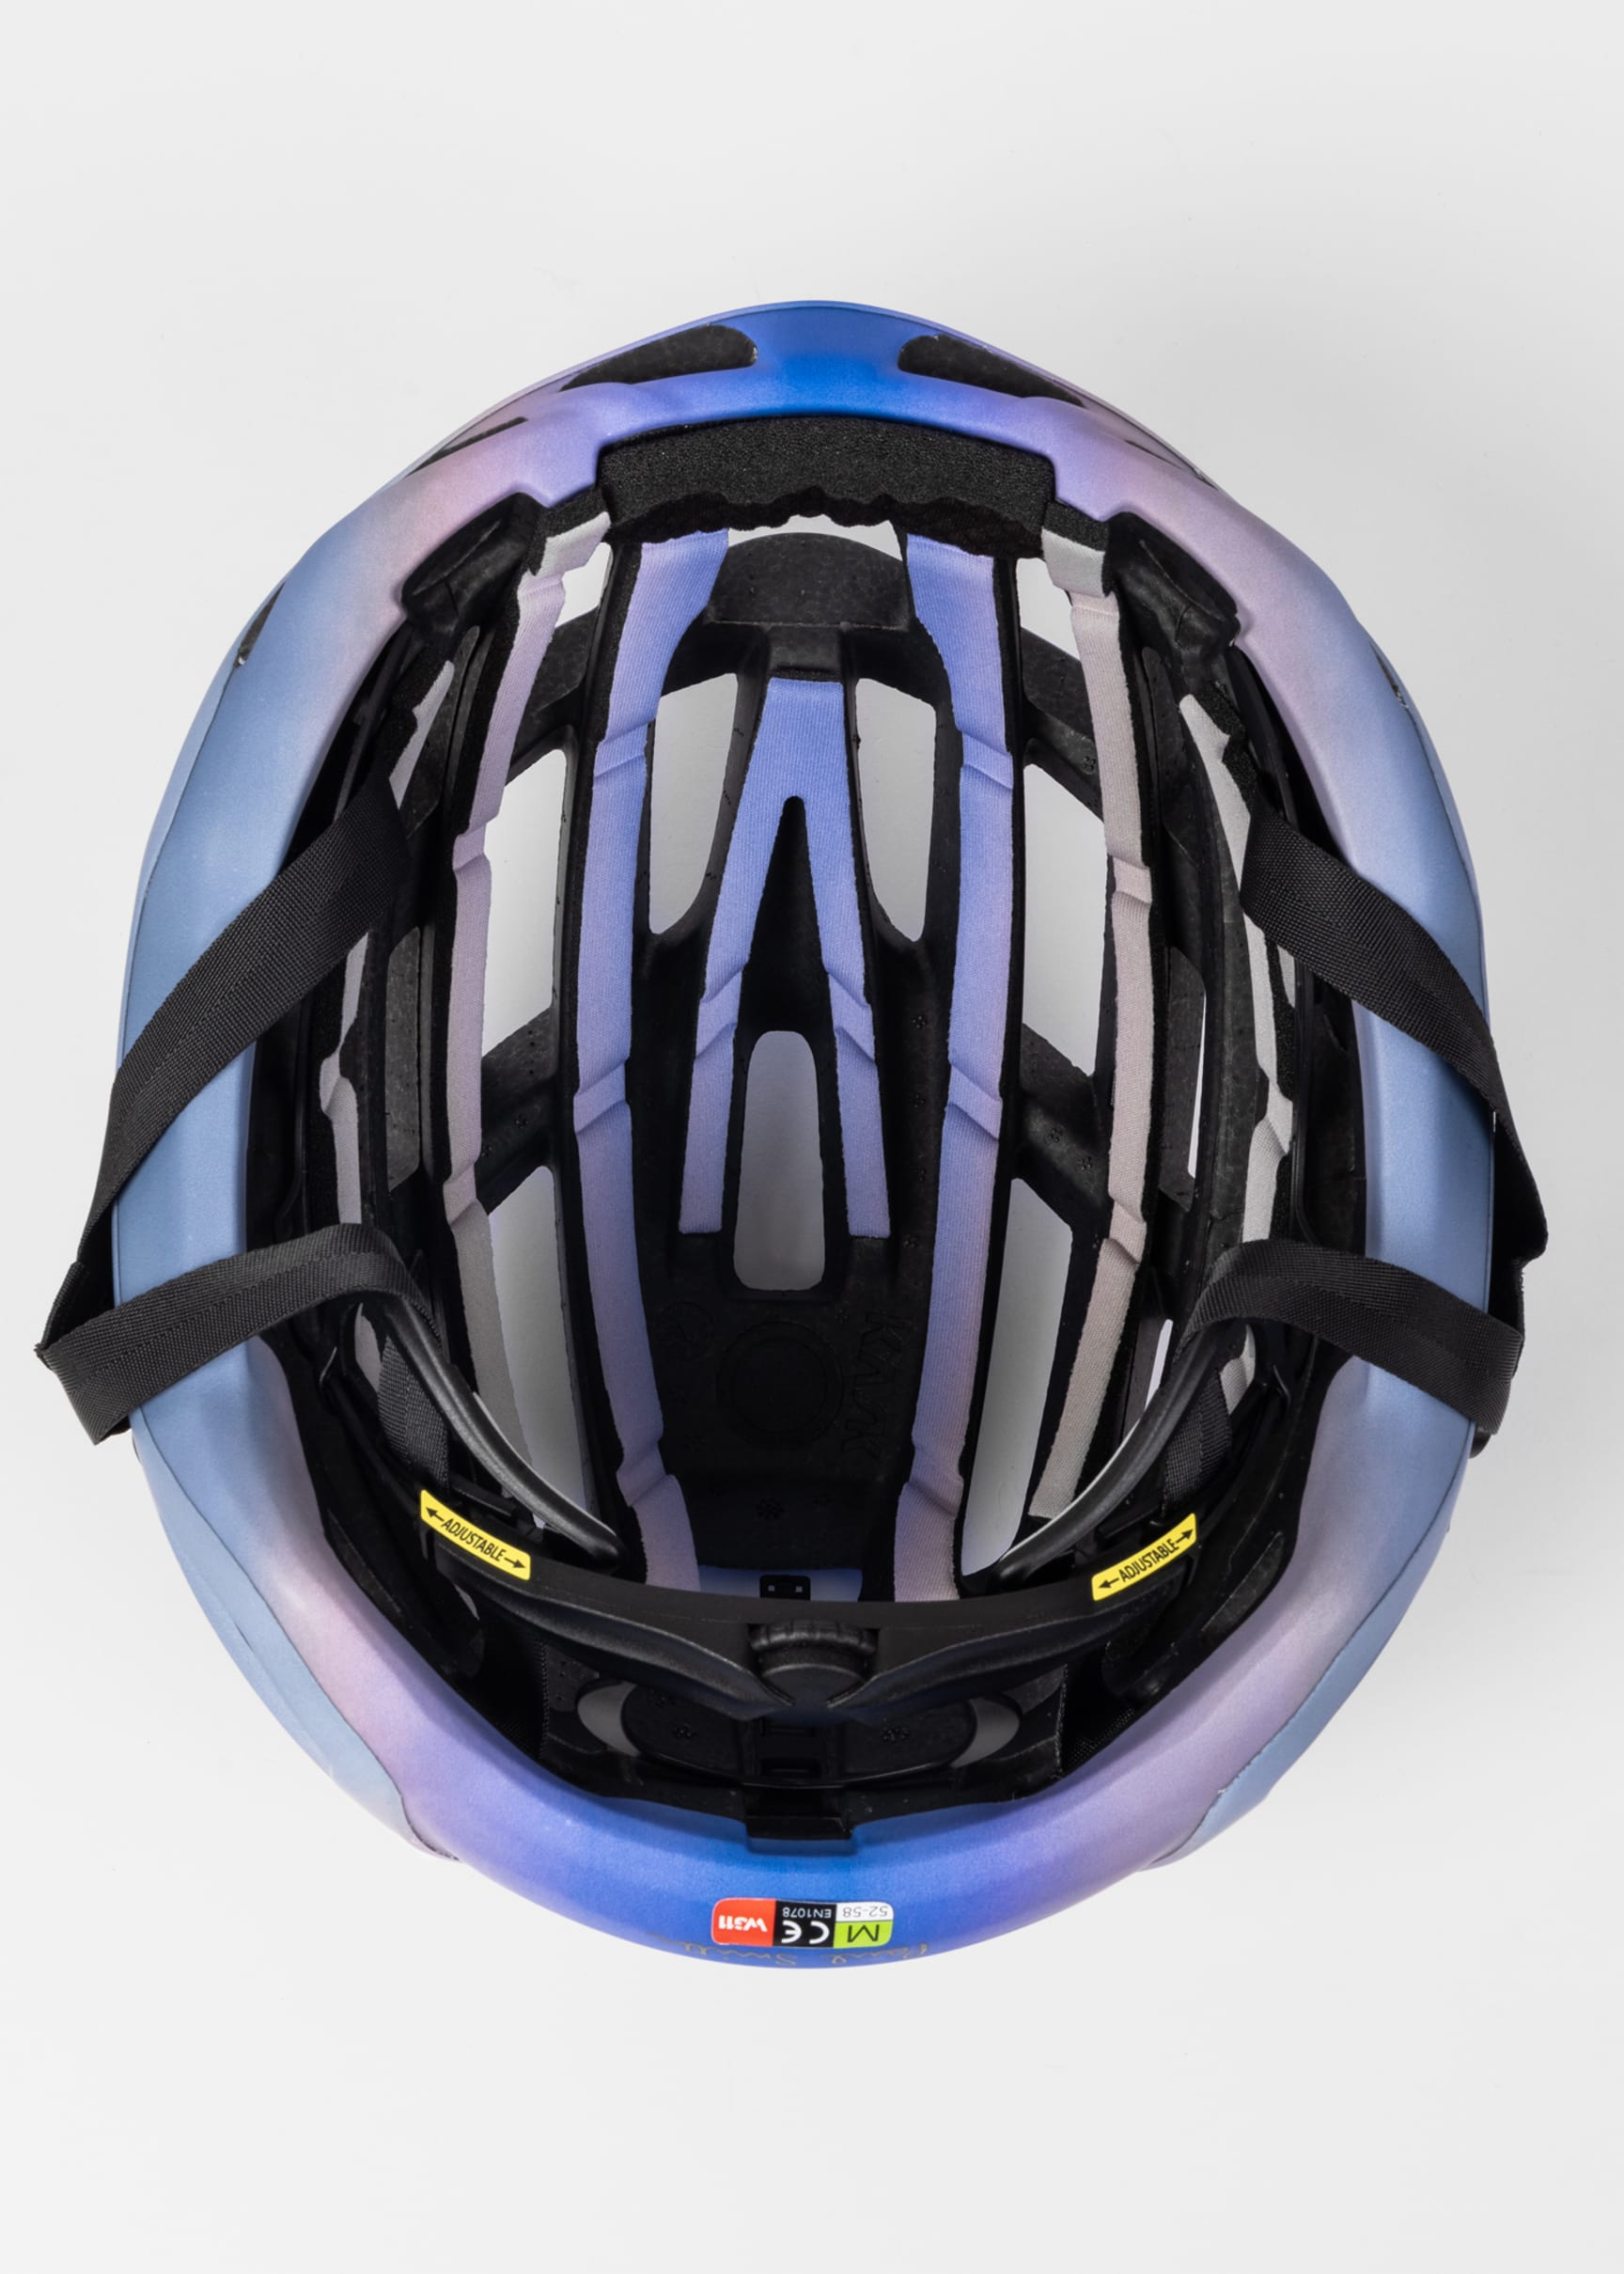 Detail View - Paul Smith + Kask 'Untitled Stripe' Valegro Cycling Helmet Paul Smith